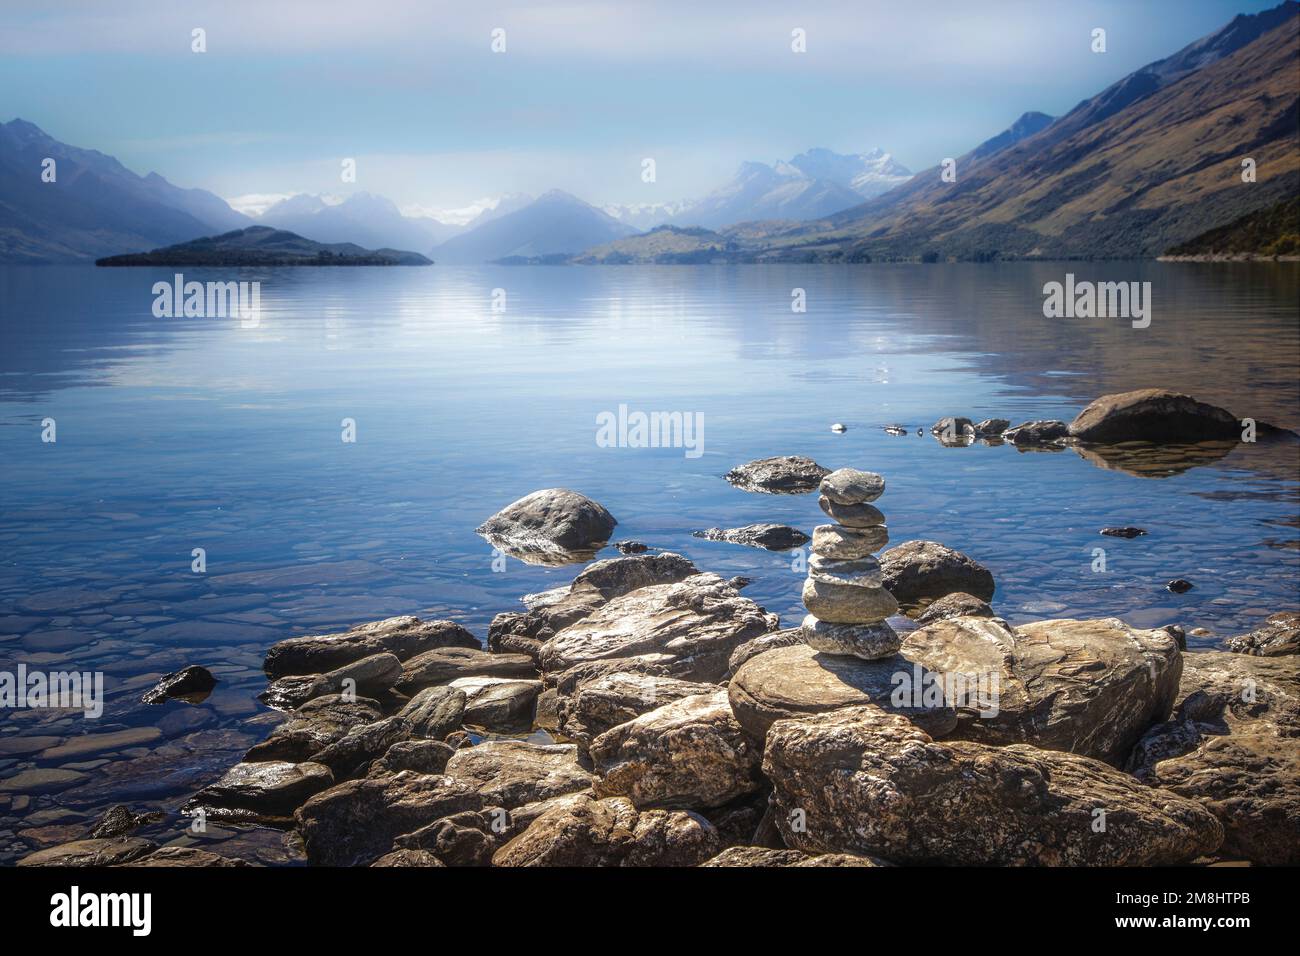 Lake Wakatipu extends to Mt. Aspiring National Park on the South Island of New Zealand. Stock Photo